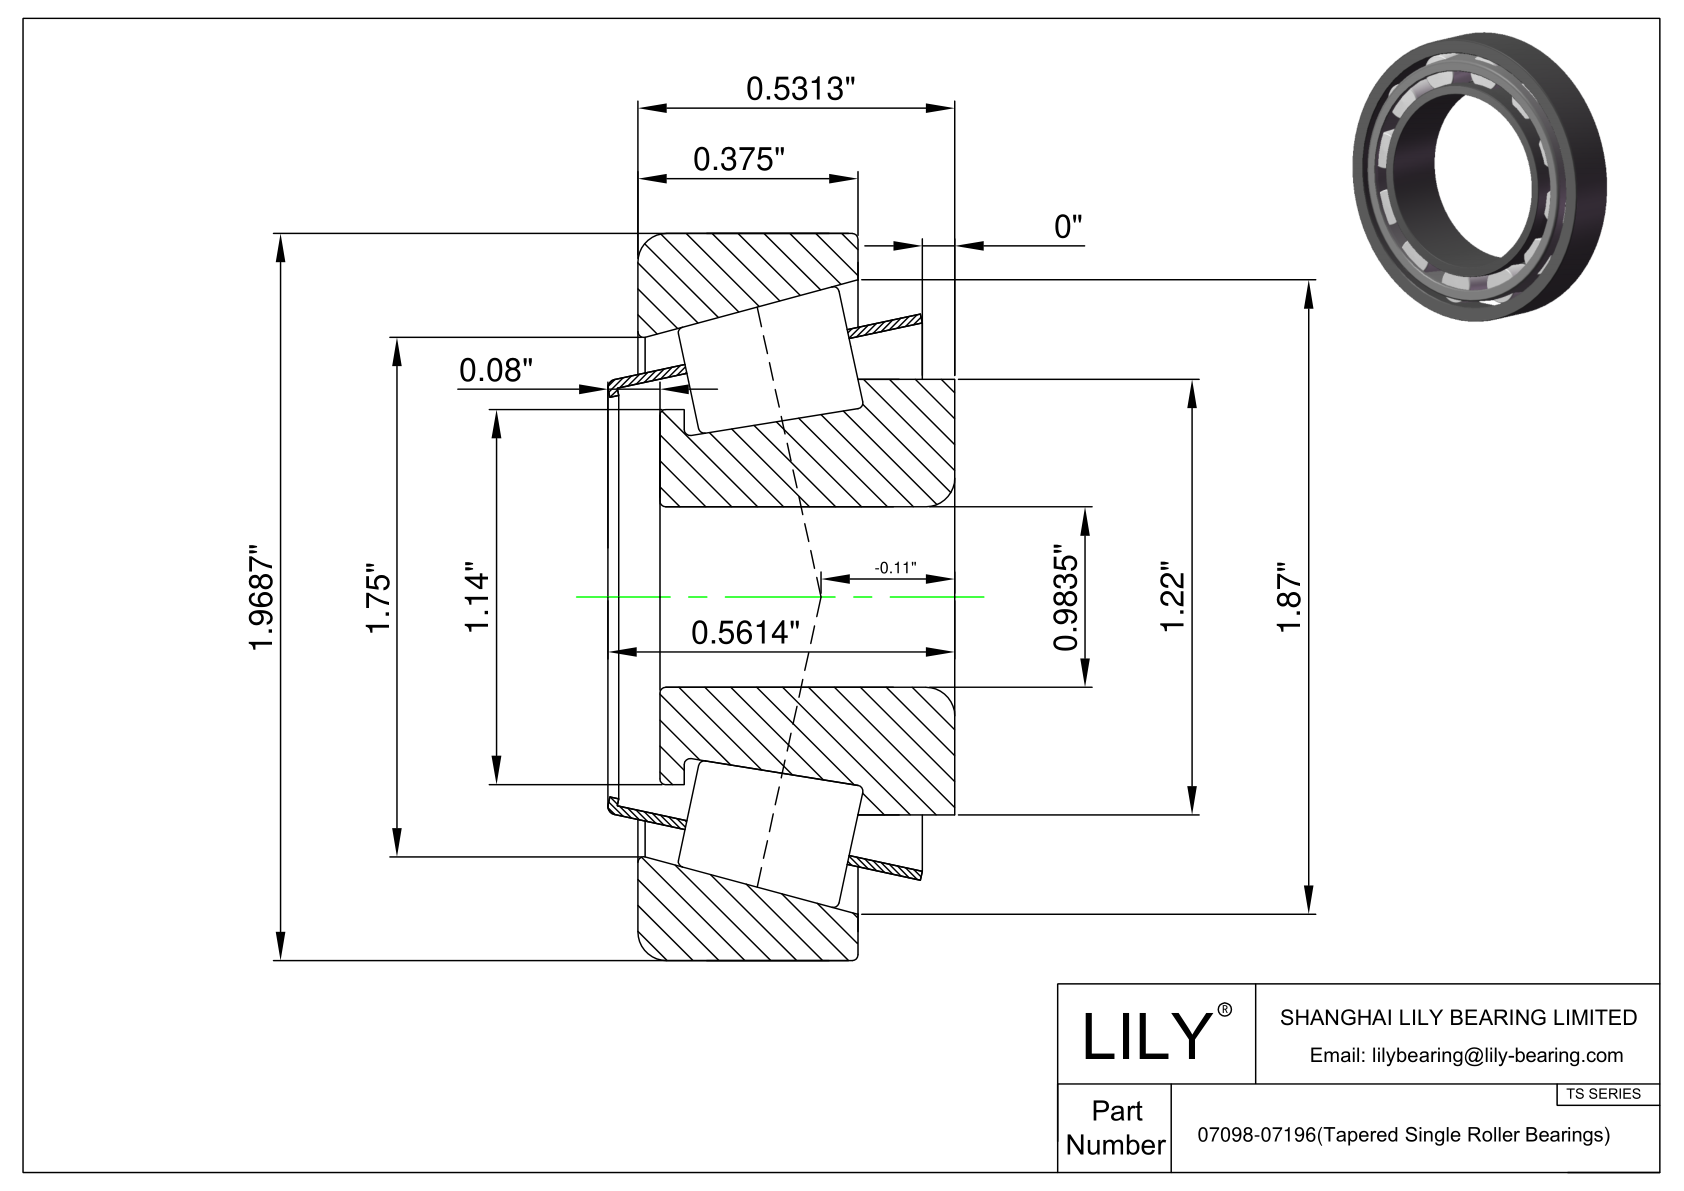 07098-07196 TS (Tapered Single Roller Bearings) (Imperial) cad drawing